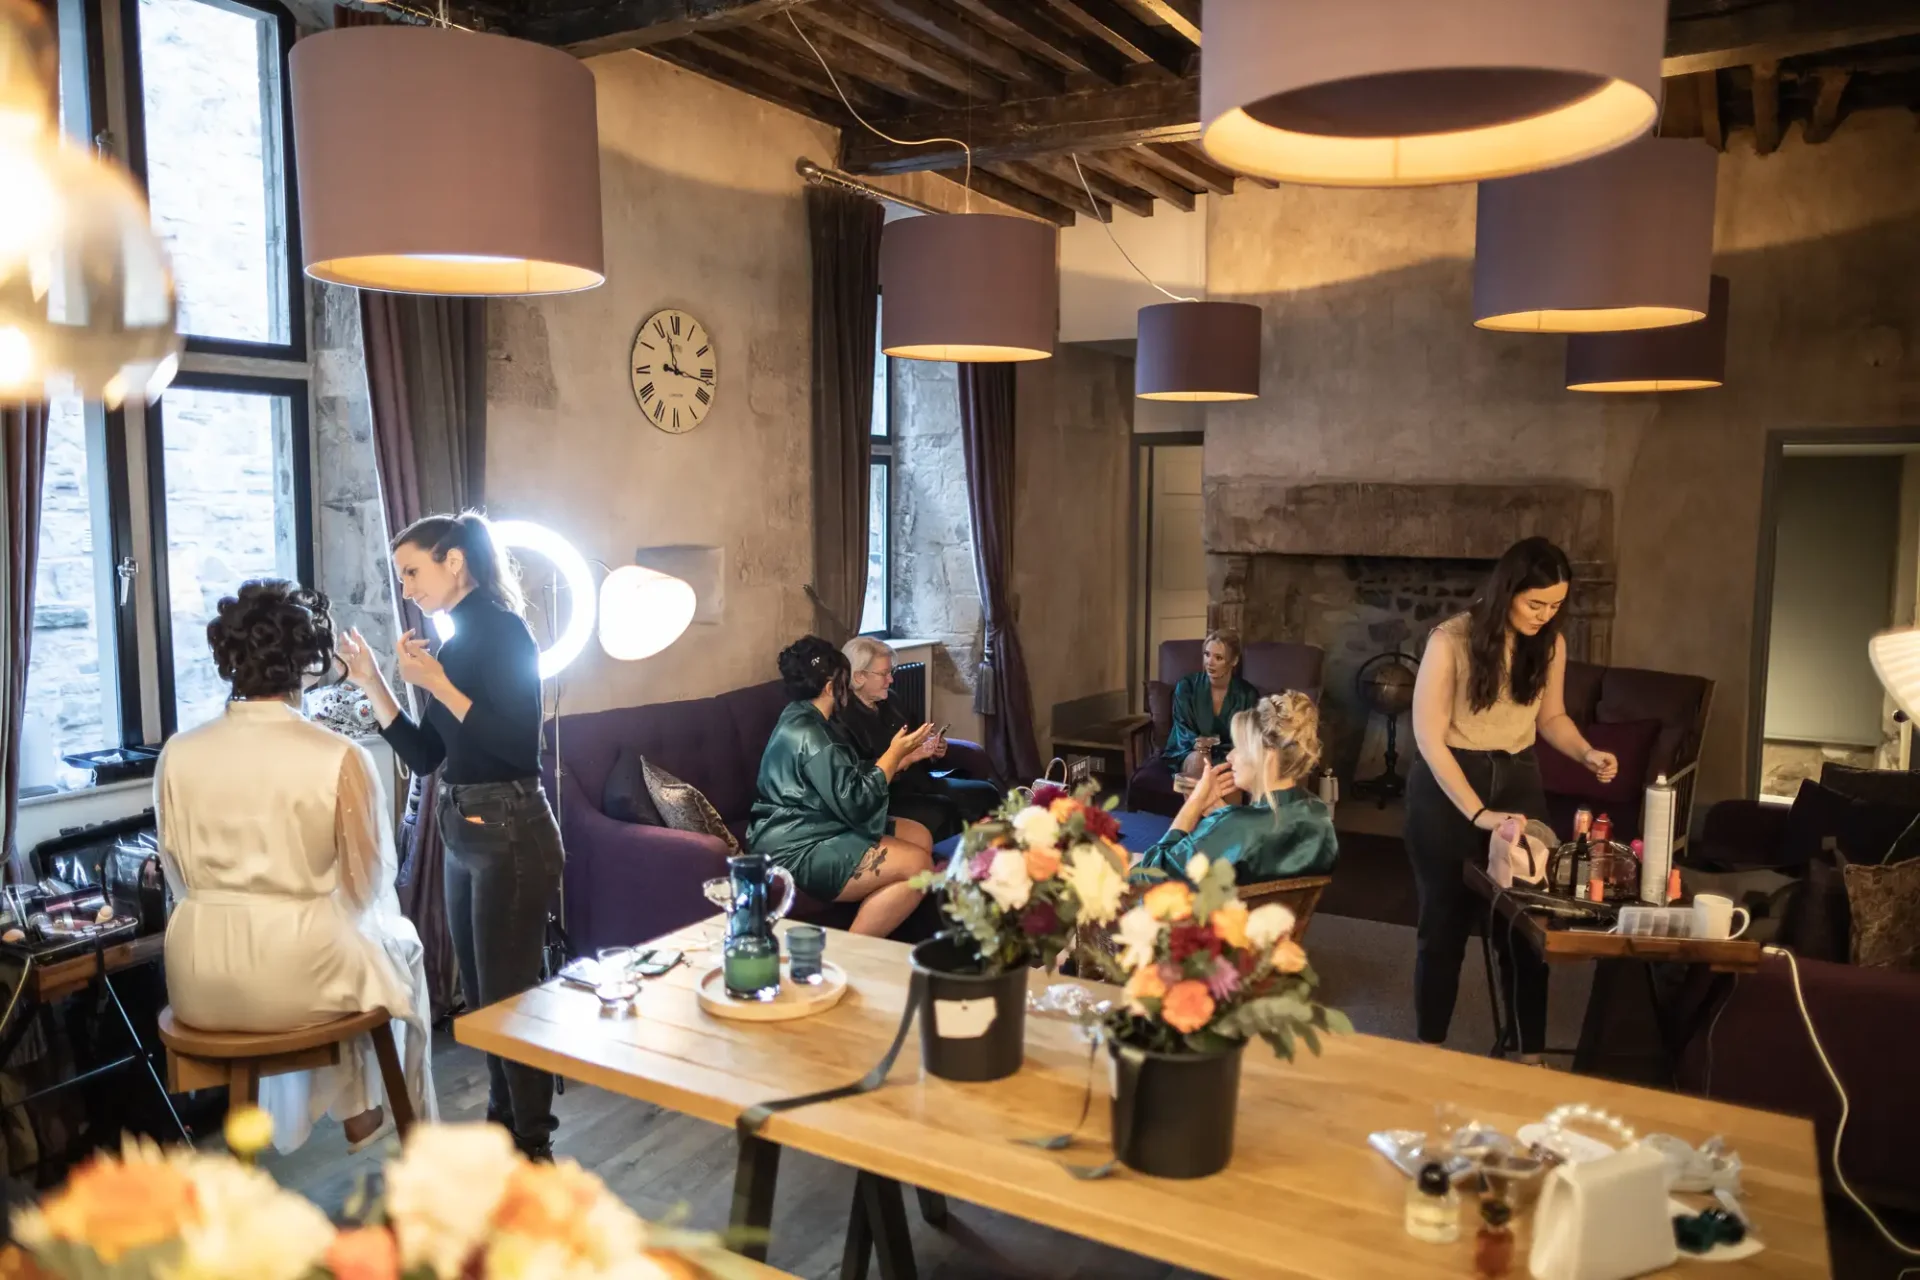 People preparing for an event in a cozy room with stone walls and modern lighting. some sit in robes getting makeup done while others engage in conversation.